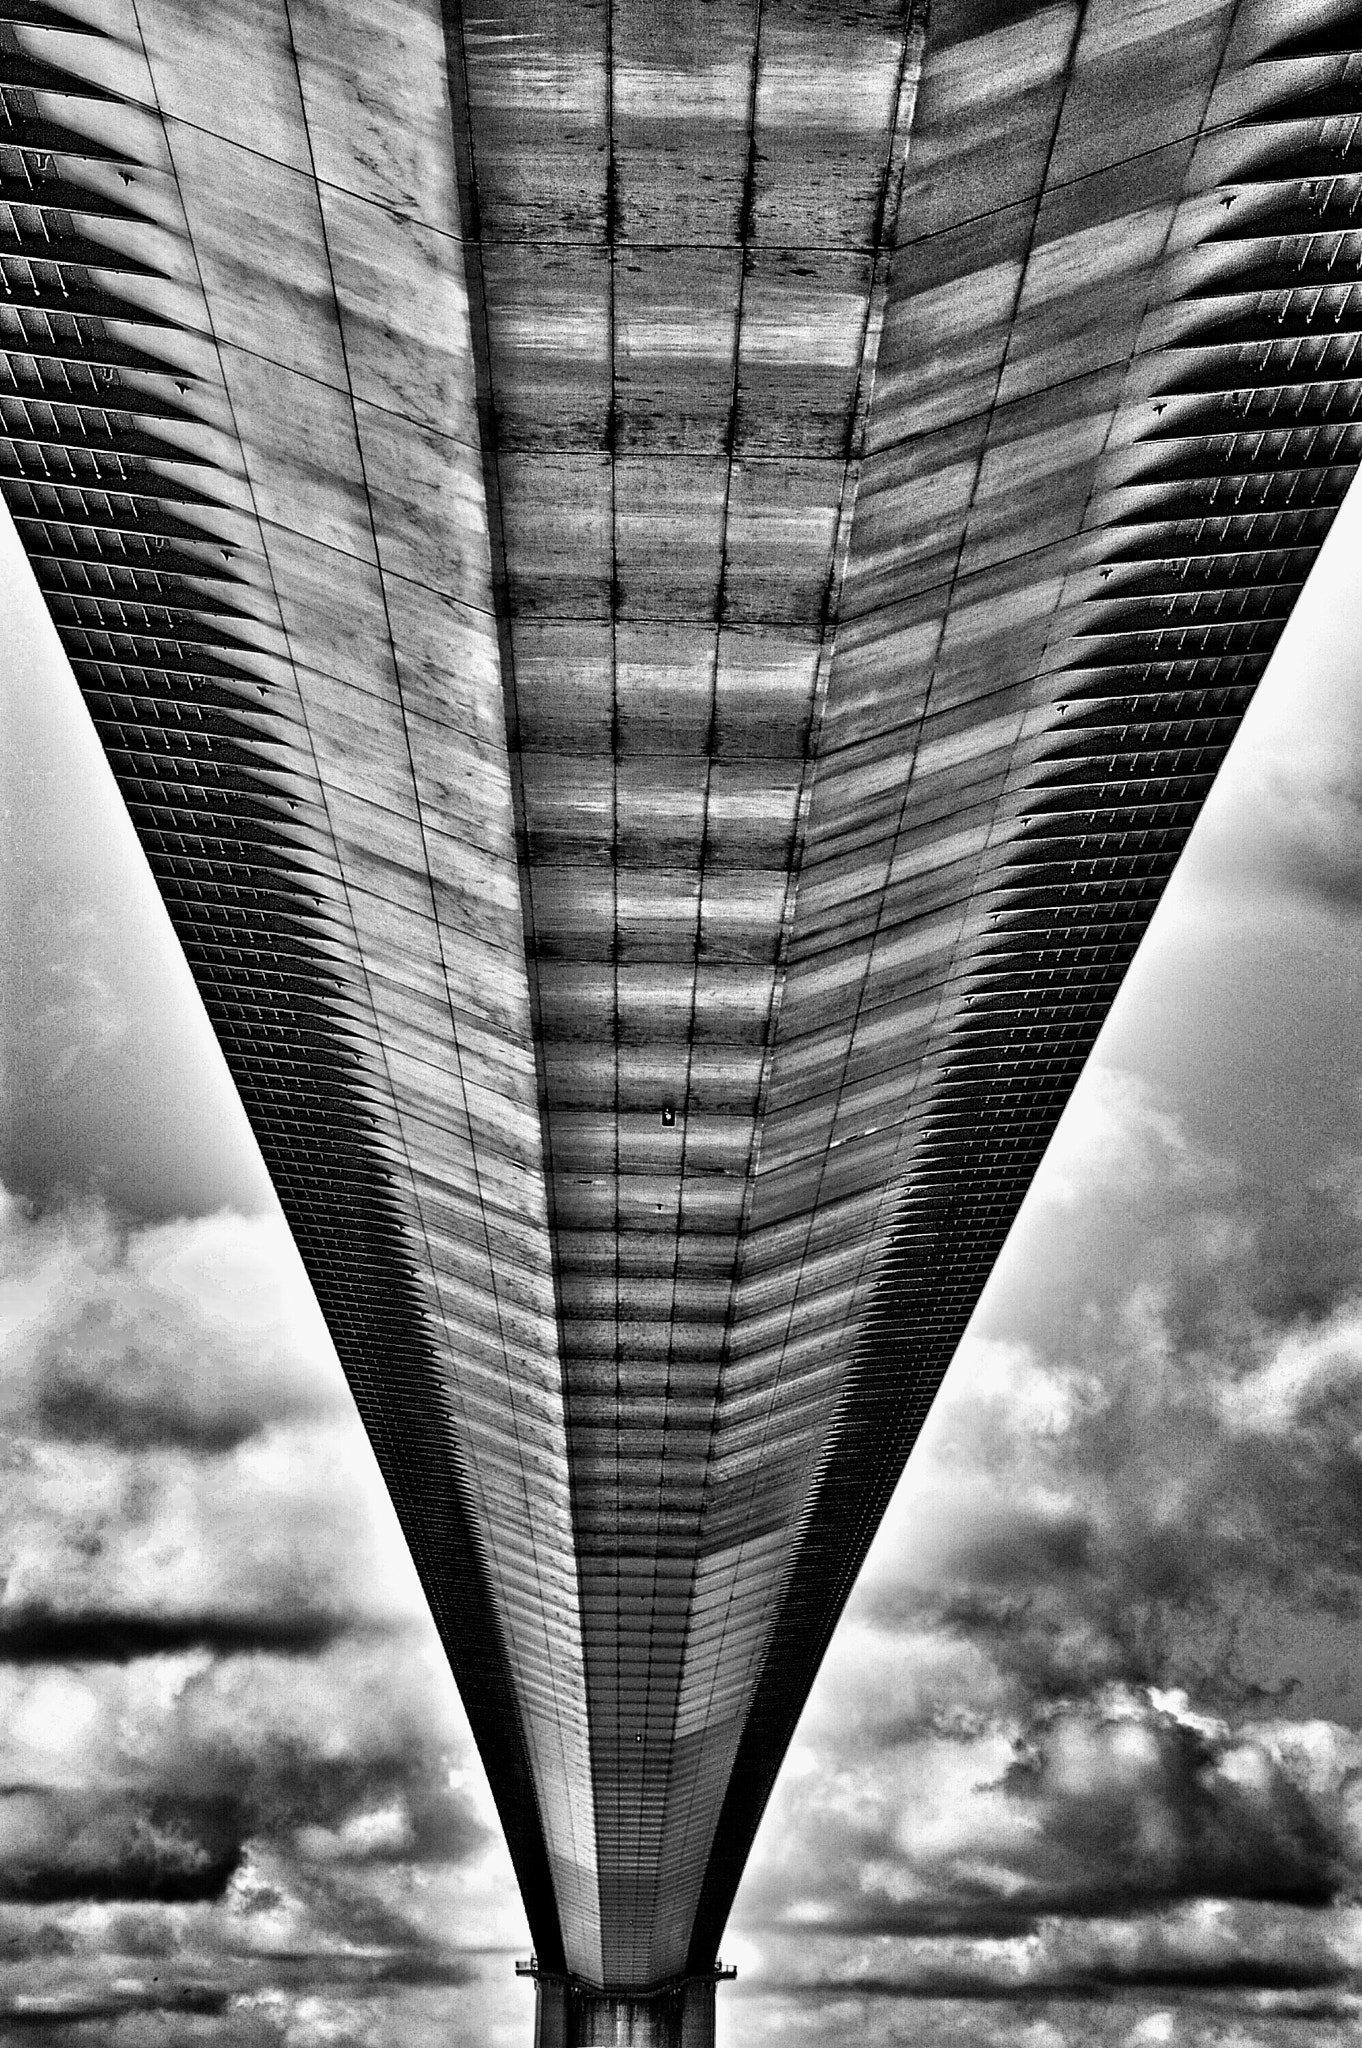 Samsung GX-1S sample photo. The humber bridge, once the longest suspension bridge in the world. photography